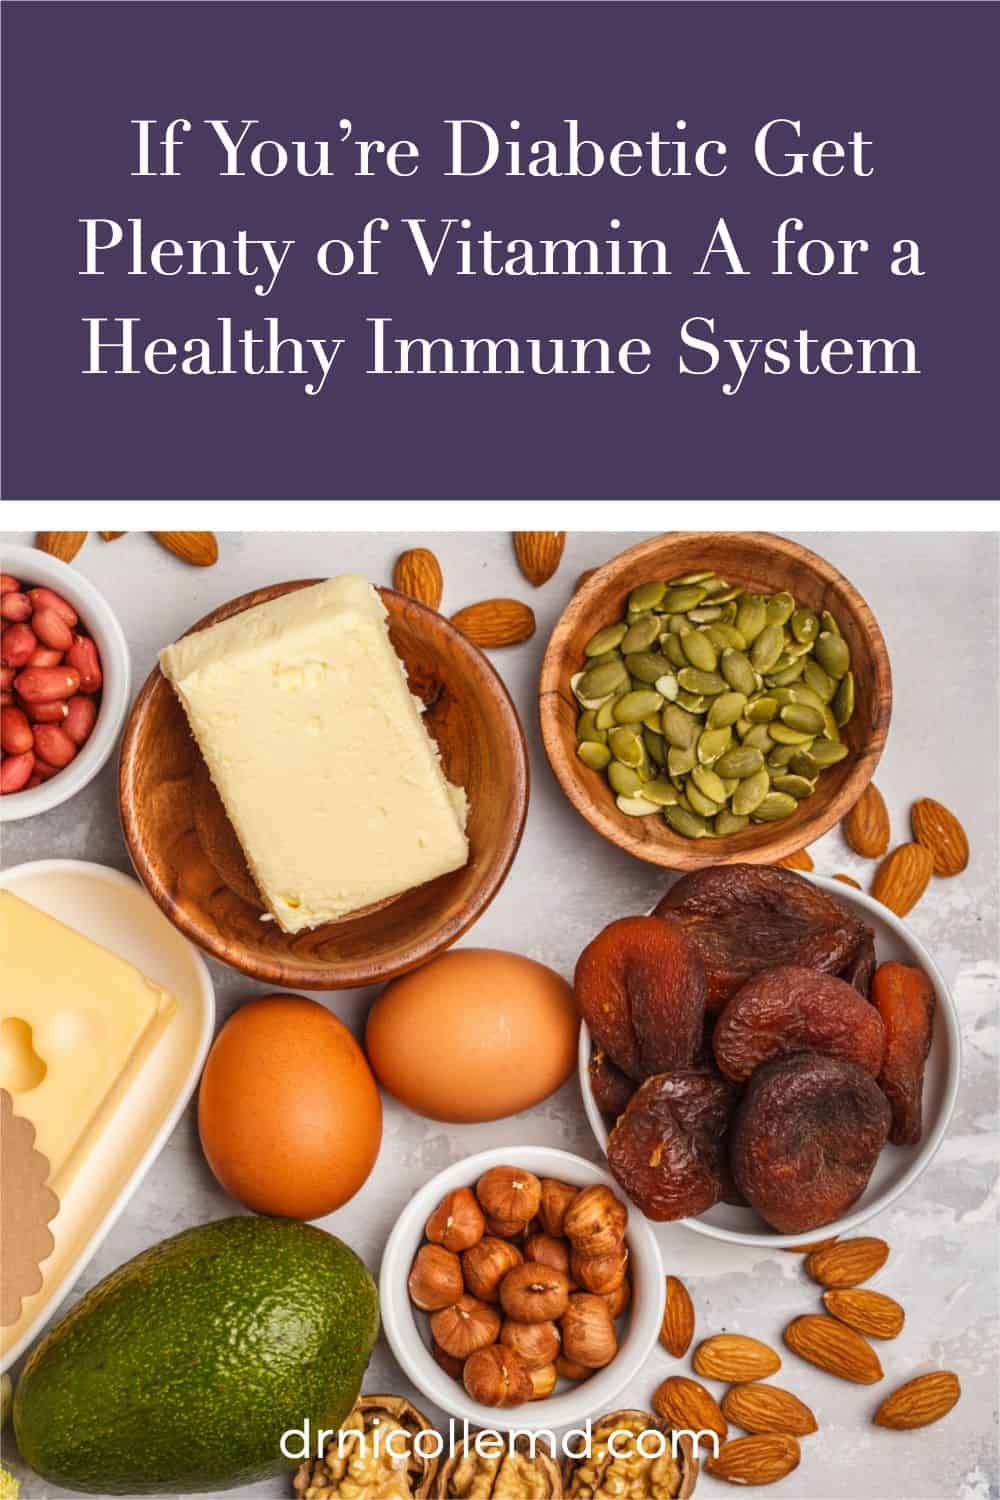 If You’re Diabetic Get Plenty of Vitamin A for a Healthy Immune System